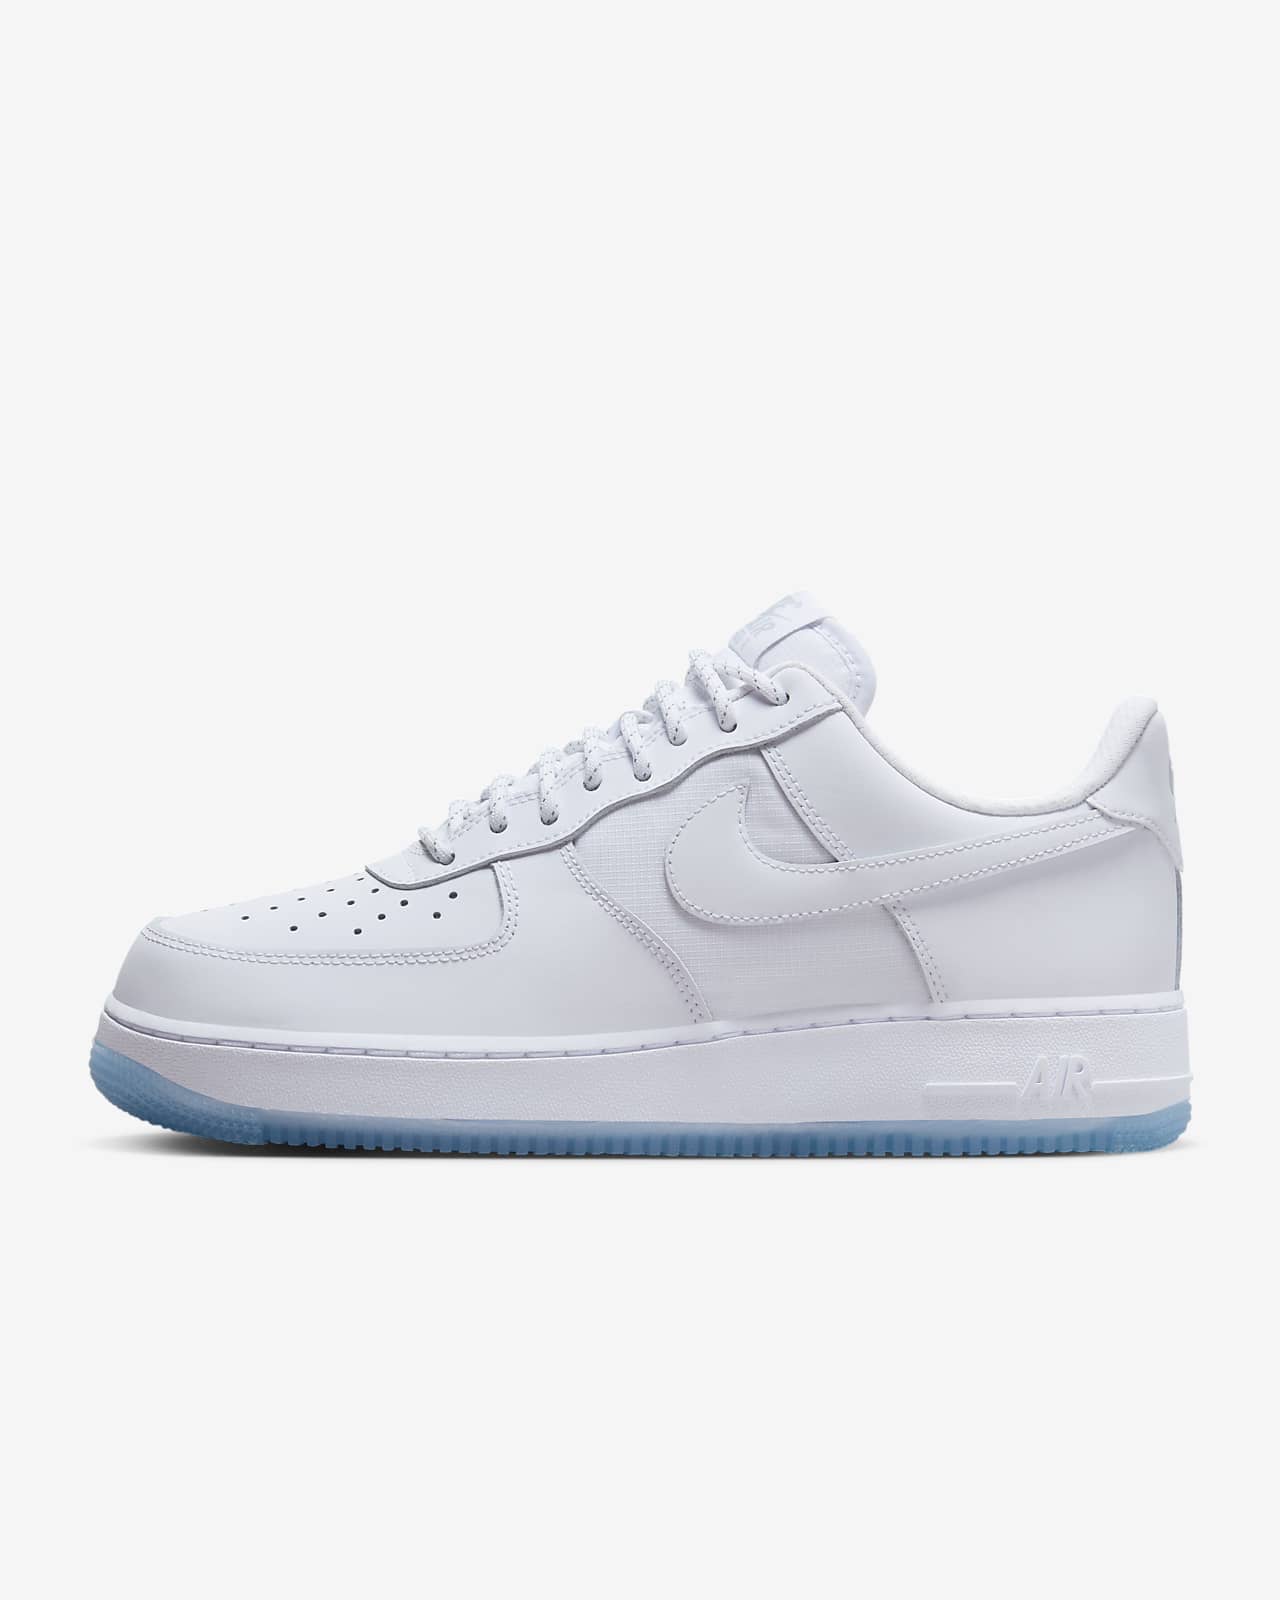 Aggregate more than 154 air force 1 sneakers